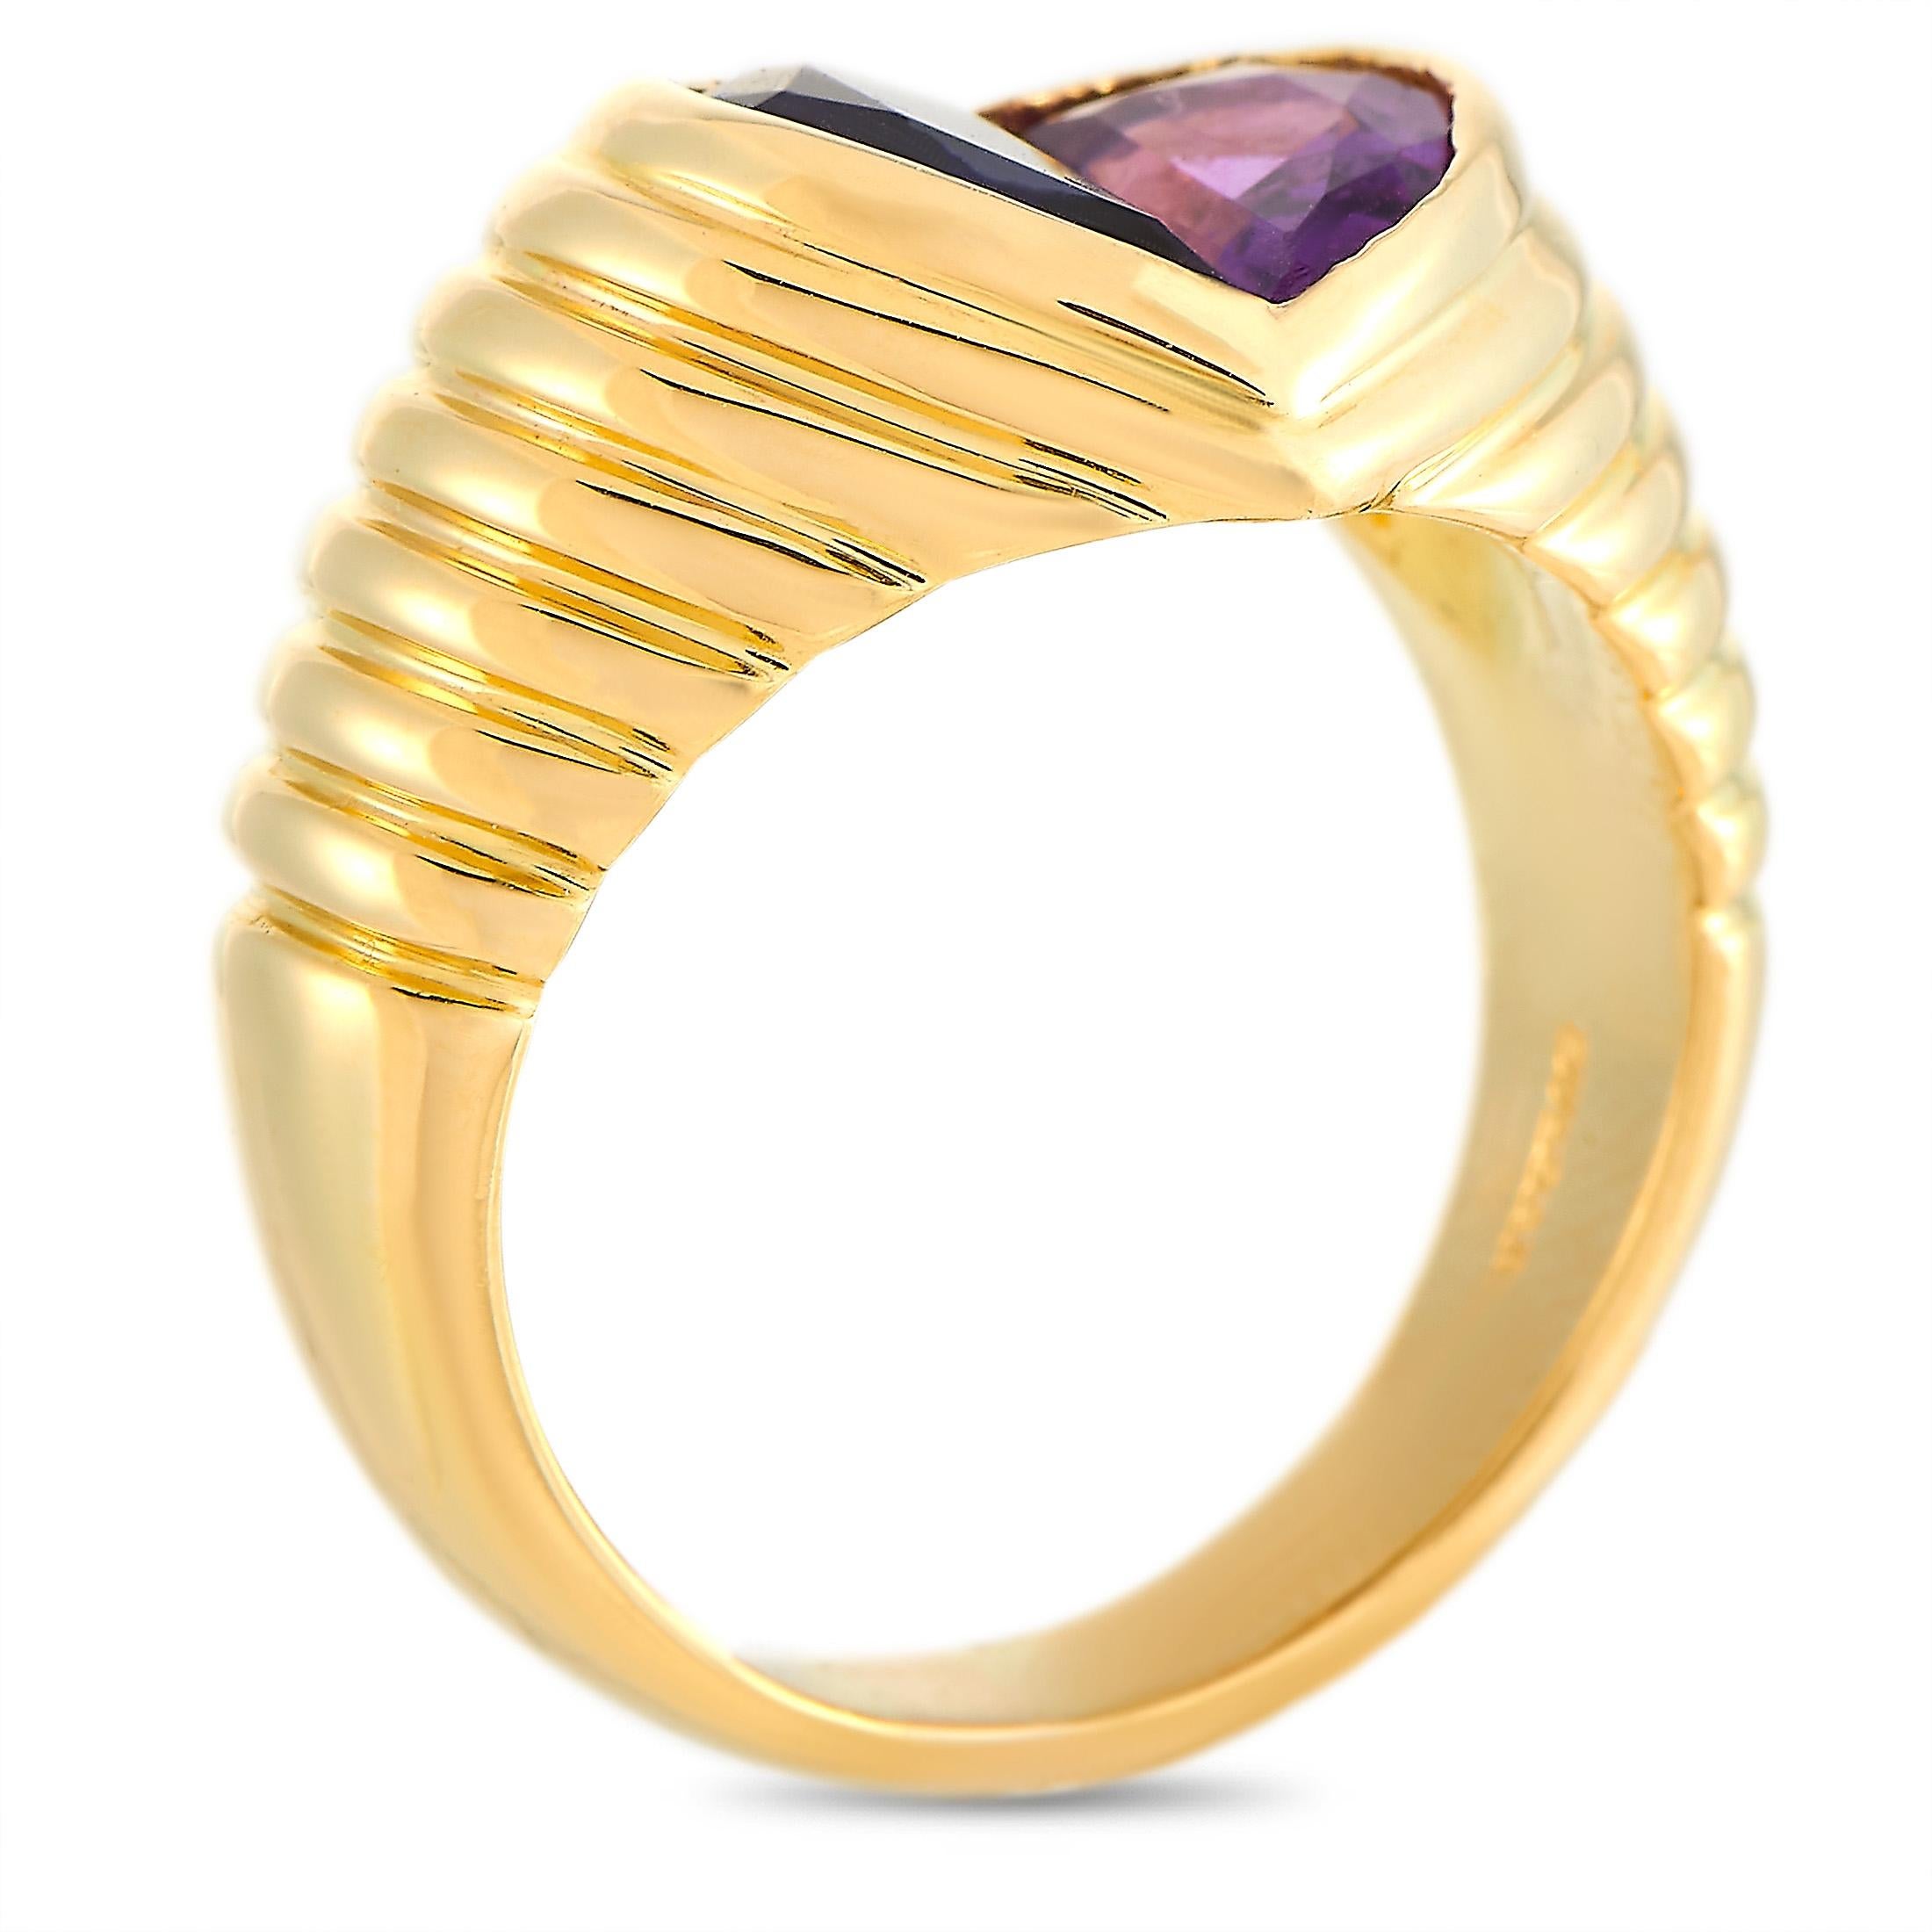 The Bvlgari “Doppio” ring is made of 18K yellow gold and set with an amethyst and an iolite. The ring weighs 10.9 grams, boasting band thickness of 5 mm and top height of 3 mm, while top dimensions measure 10 by 10 mm.
 
 This item is offered in